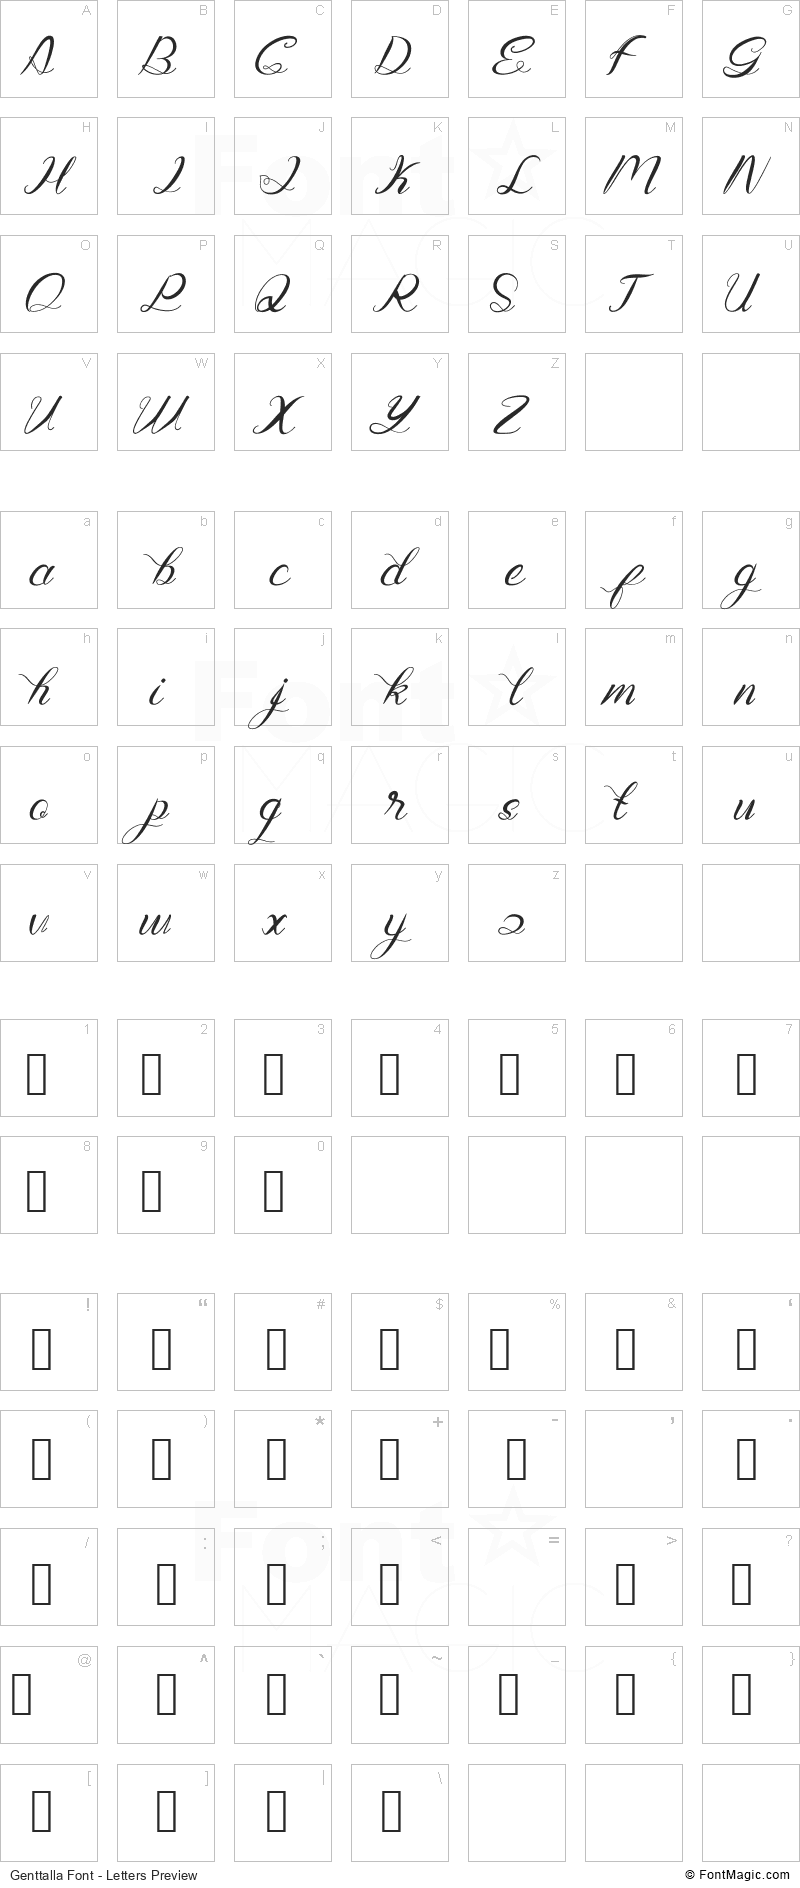 Genttalla Font - All Latters Preview Chart